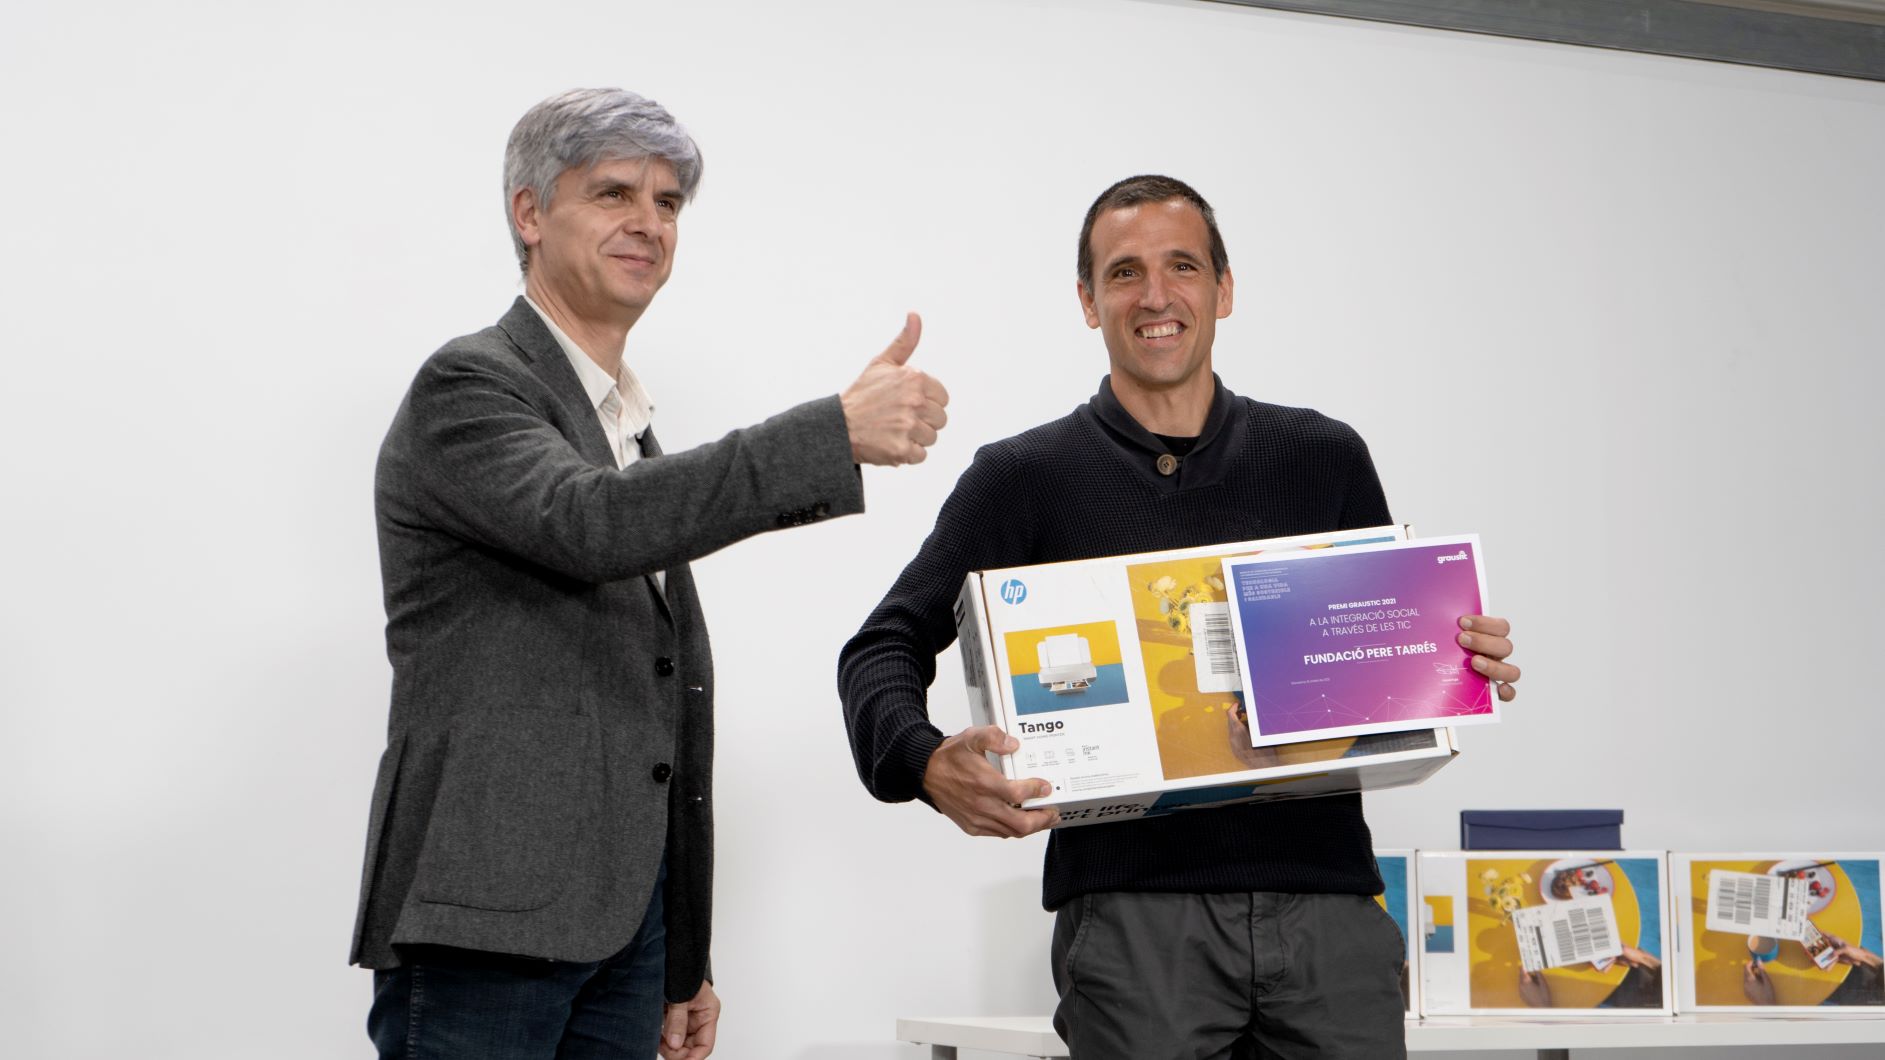 iSocial Foundation awards the Prize for Social Integration through ICT to Pere Tarrés Foundation